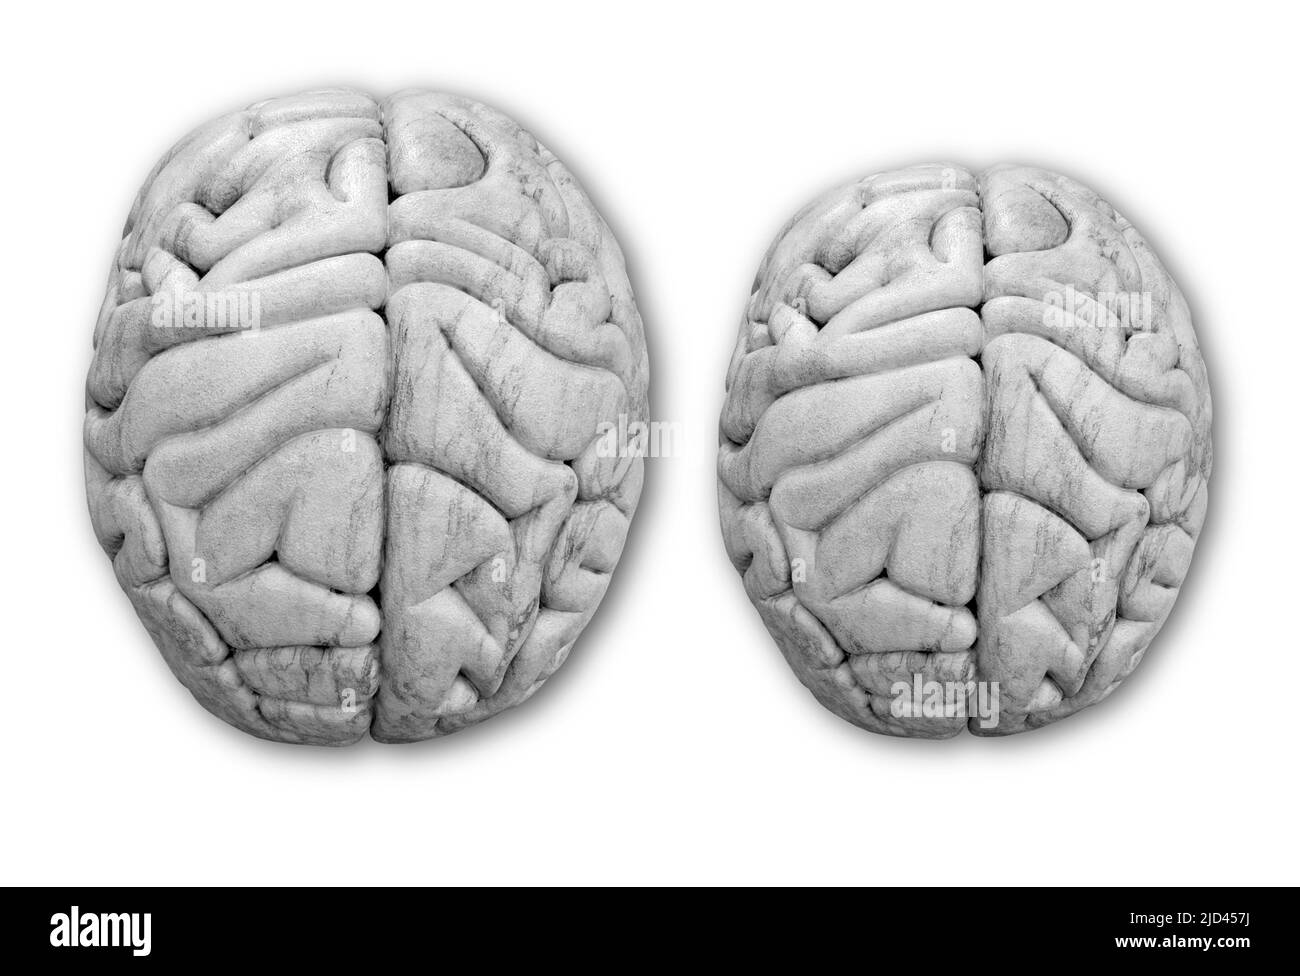 Reduced brain volume after Covid-19 infection, illlustration Stock Photo